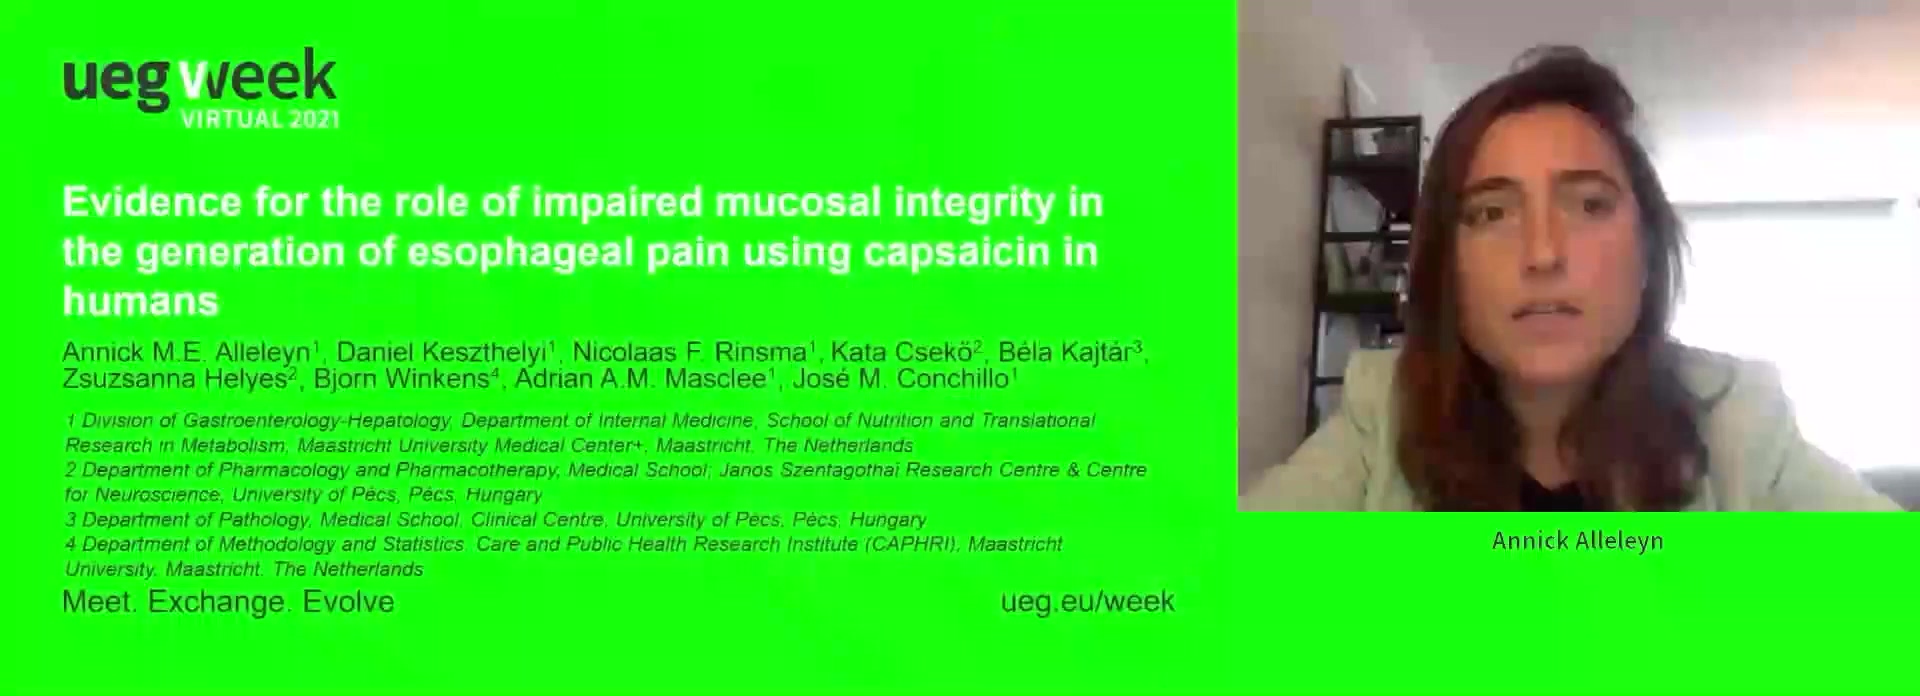 EVIDENCE FOR THE ROLE OF IMPAIRED MUCOSAL INTEGRITY IN THE GENERATION OF ESOPHAGEAL PAIN USING CAPSAICIN IN HUMANS